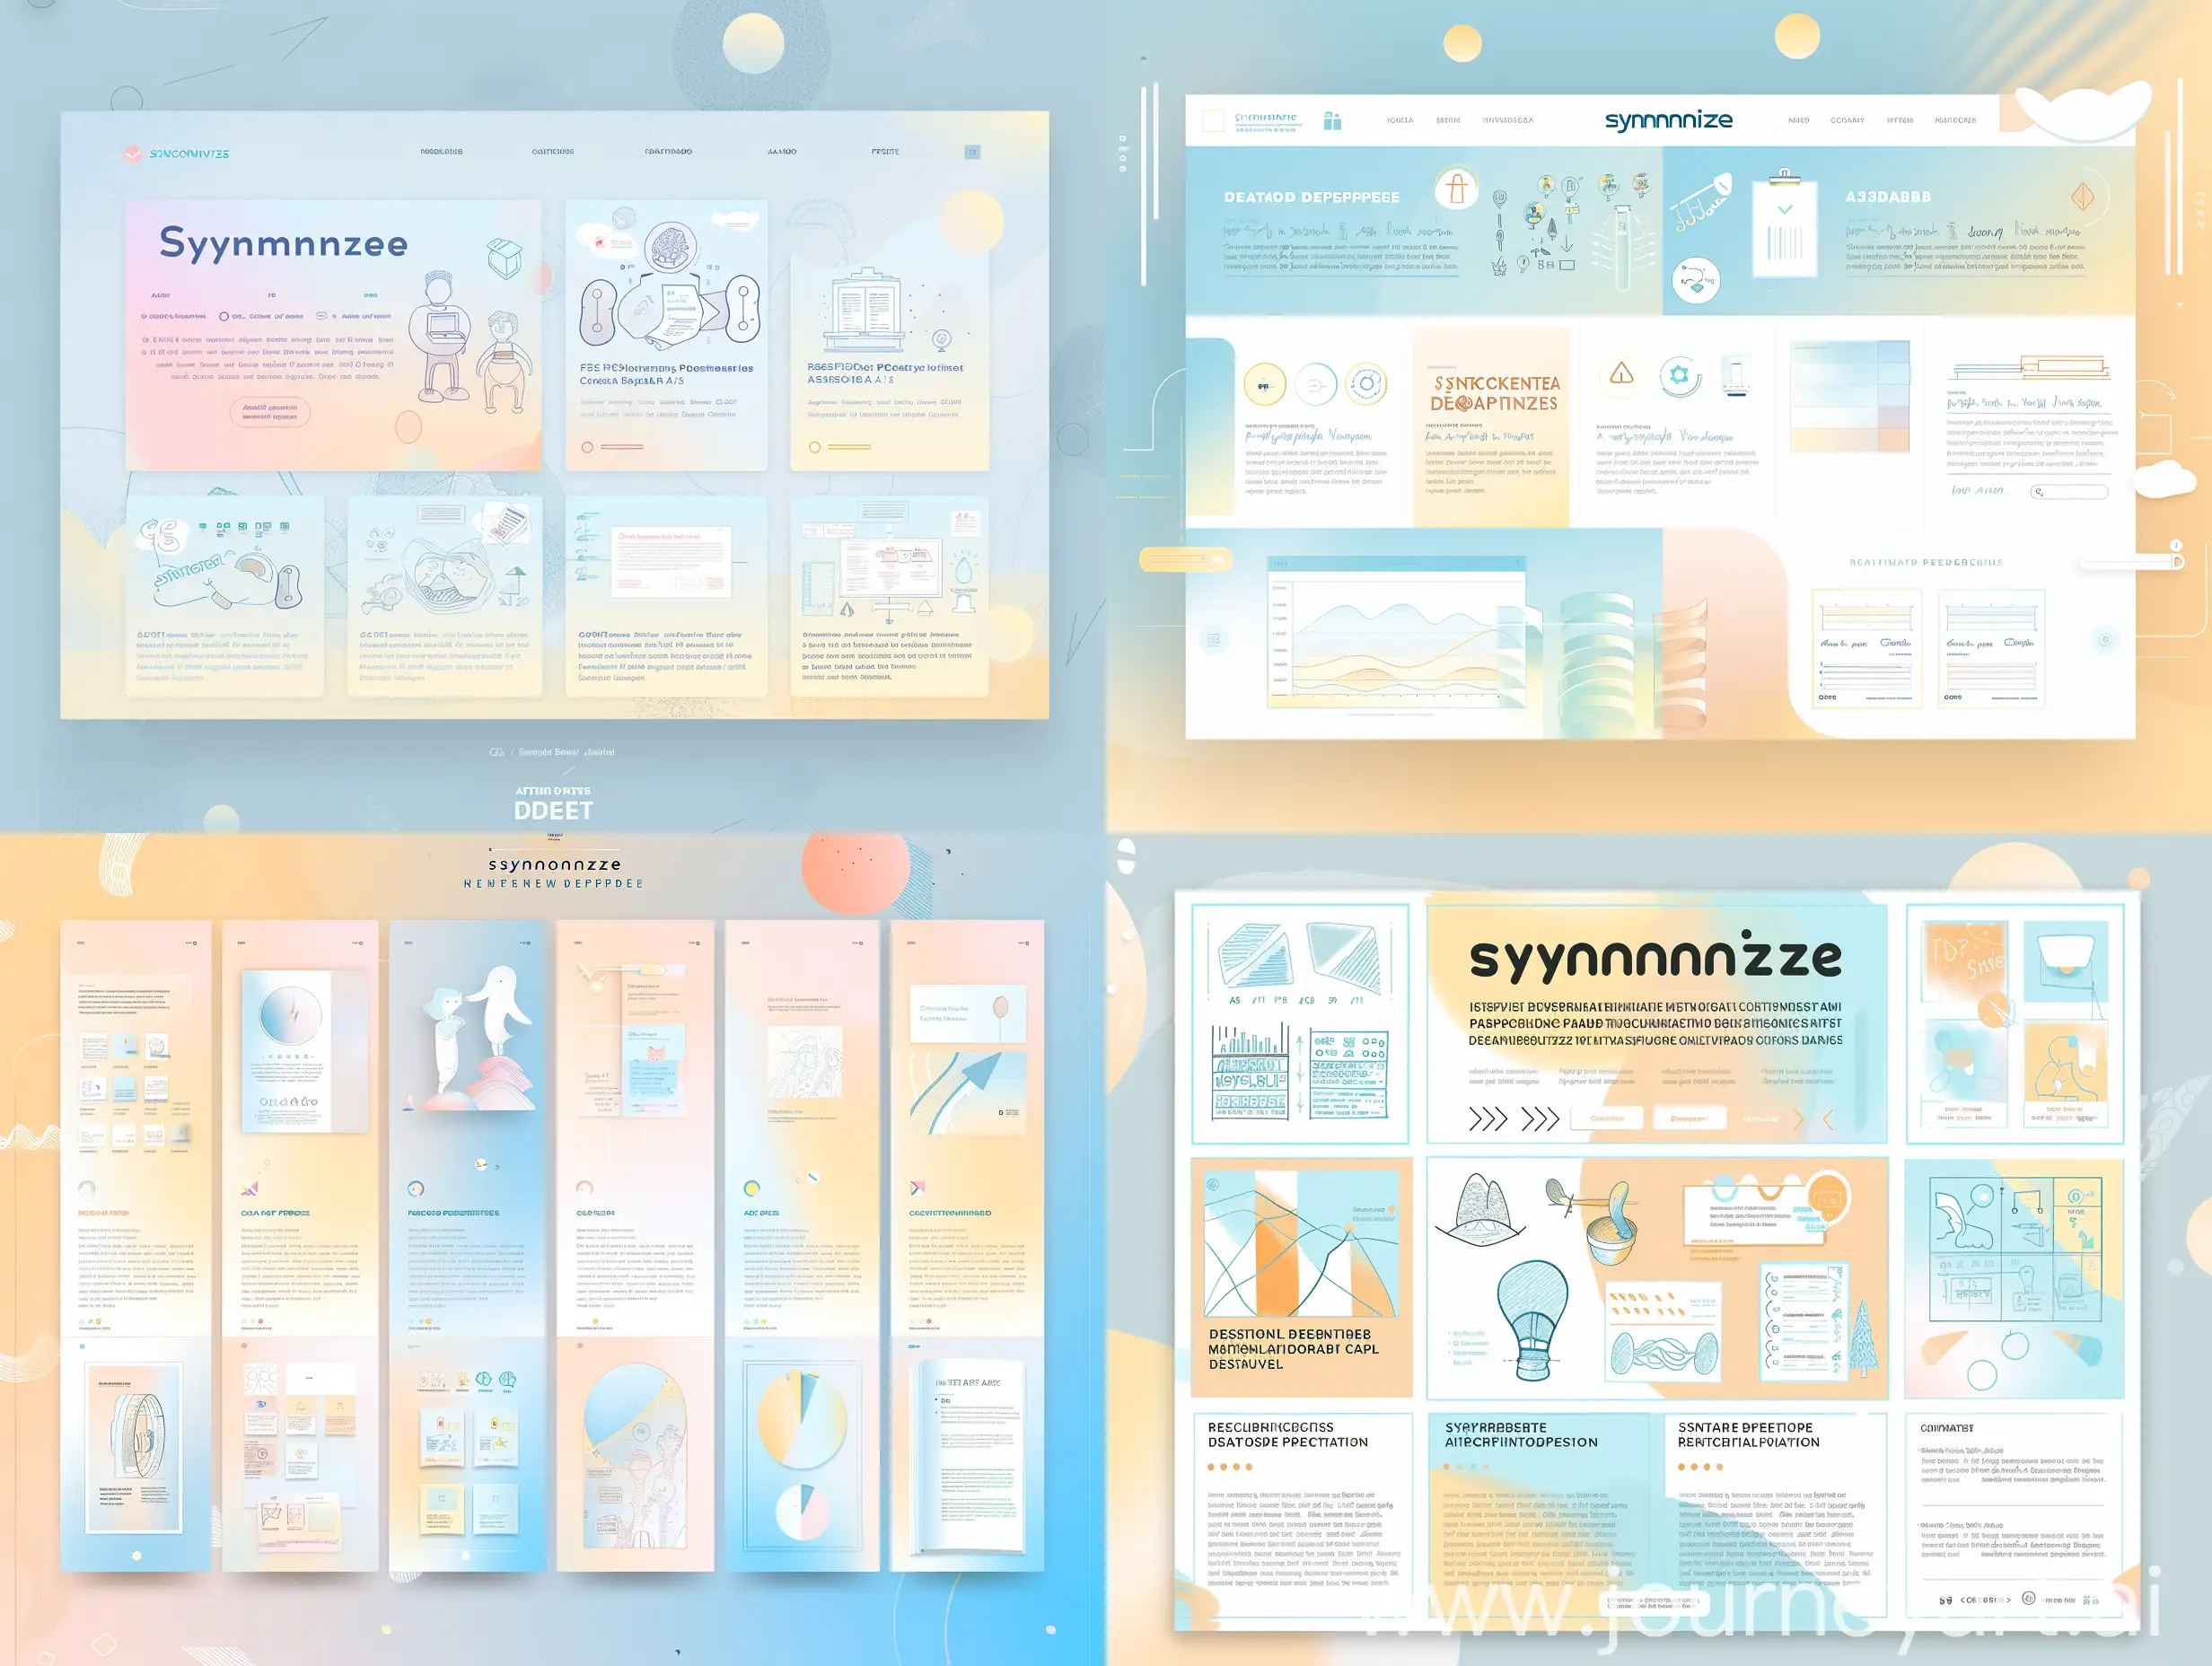 "Design a long-scroll Behance post template for 'Synkronize,' featuring a soft pastel blue (#A3DAFB) and warm pastel yellow (#FFE4A1) gradient color scheme with white (#FFFFFF) accents. The template includes a header section with the project logo and title, an issue statement section with text and icons, a research findings section with infographics, a concept development section with sketches and mood boards, a design process section with step-by-step visuals, a final design section with high-quality images, and a conclusion section with a summary and call to action. Typography is bold and playful for headers, regular for body text, and italicized for captions. Icons are simple and flat, with soft pastel backgrounds. Use rounded edges for buttons and elements, with arrow indicators for navigation and gradient spots for backgrounds."layout design style